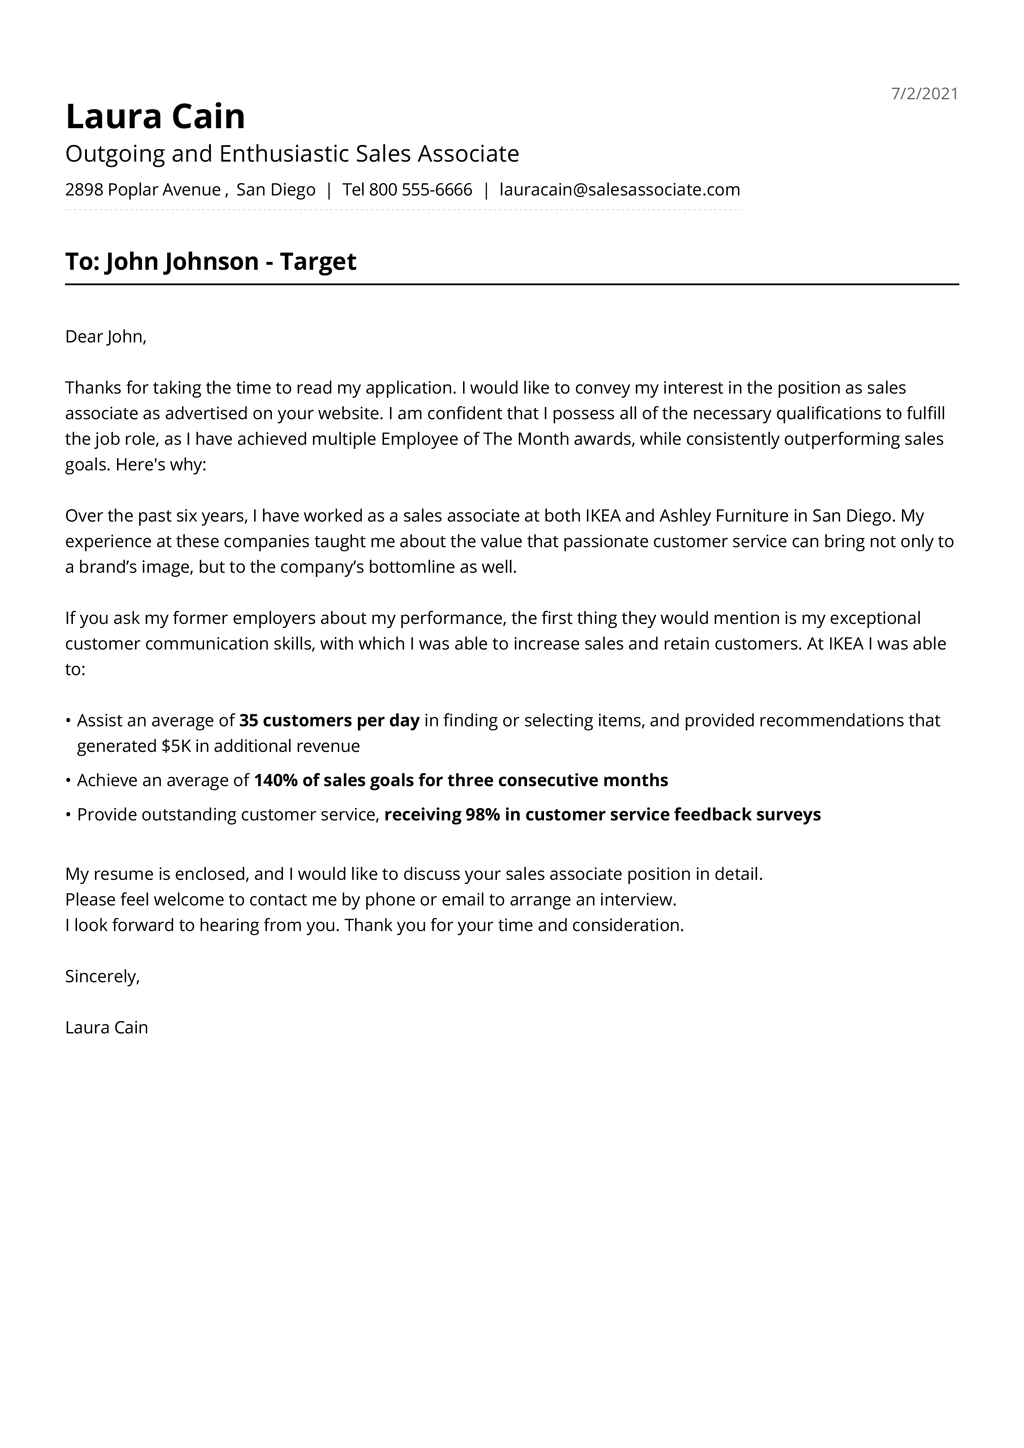 Cover Letter Templates For 2021 Free Download 